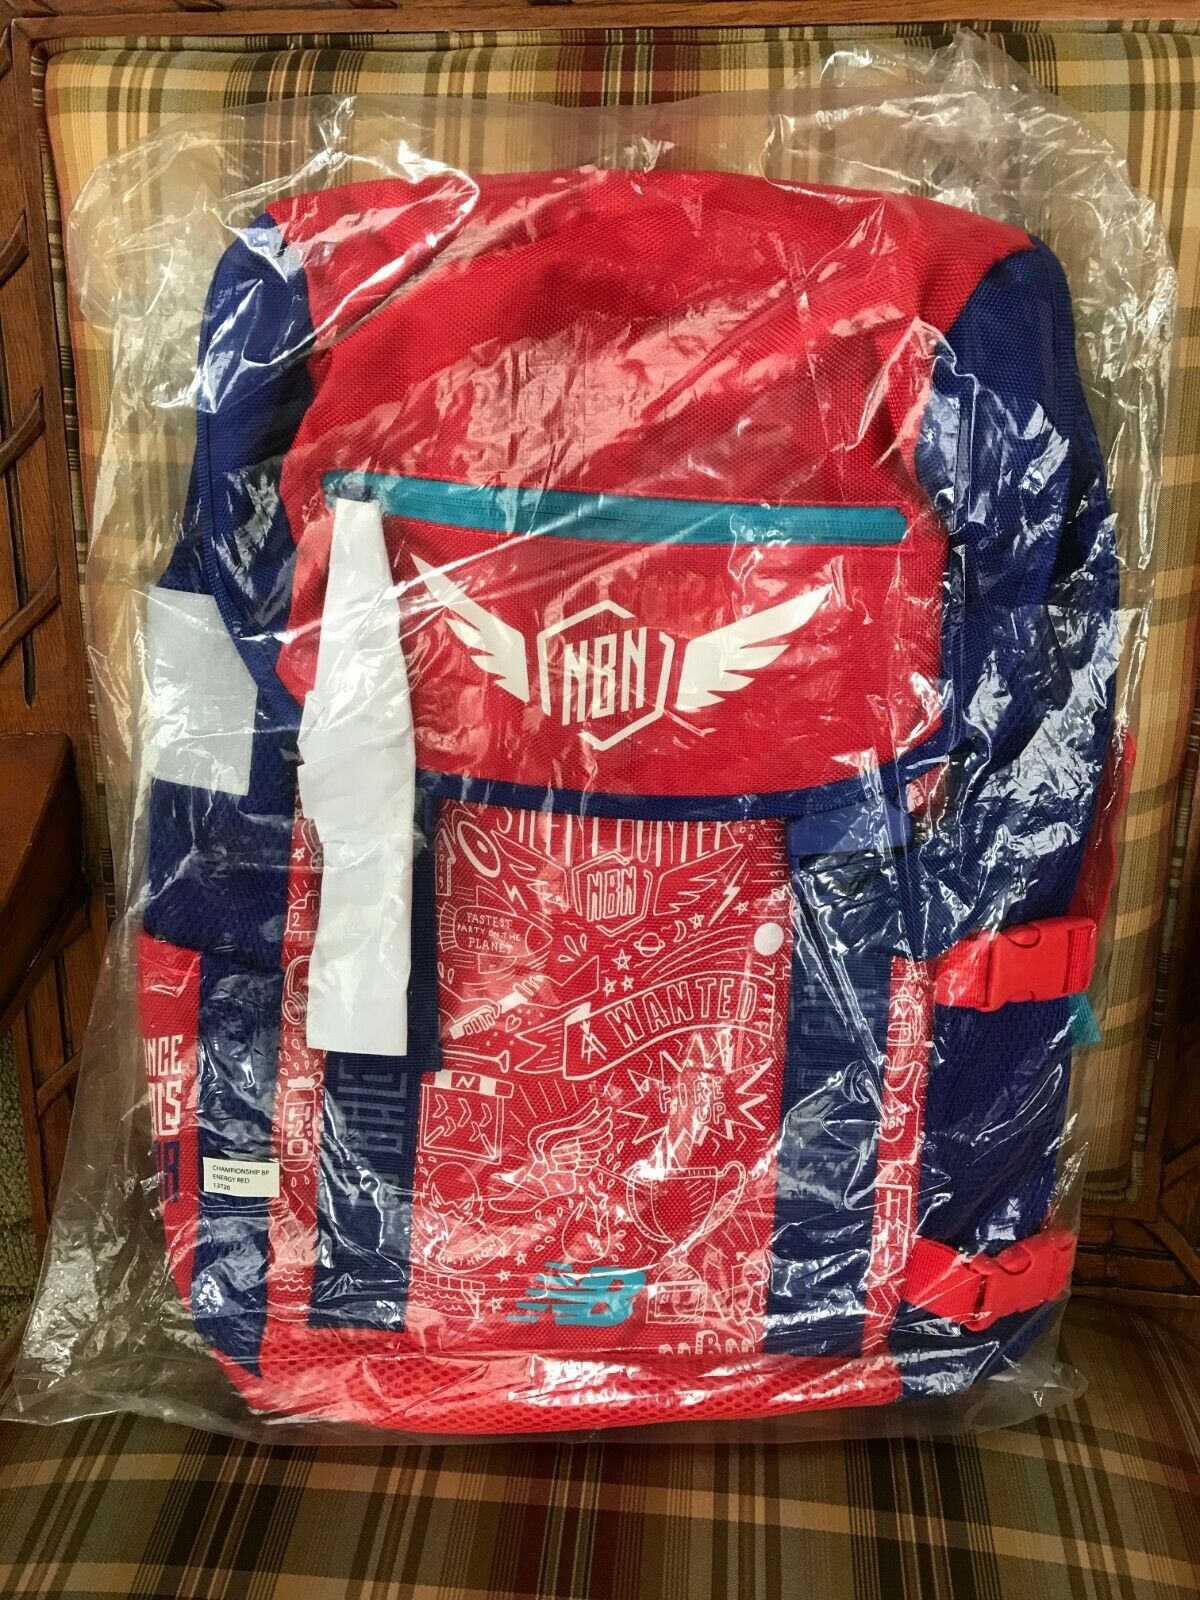 2019 Nbno New Balance Nationals Outdoor "championship" Backpack. New In Plastic